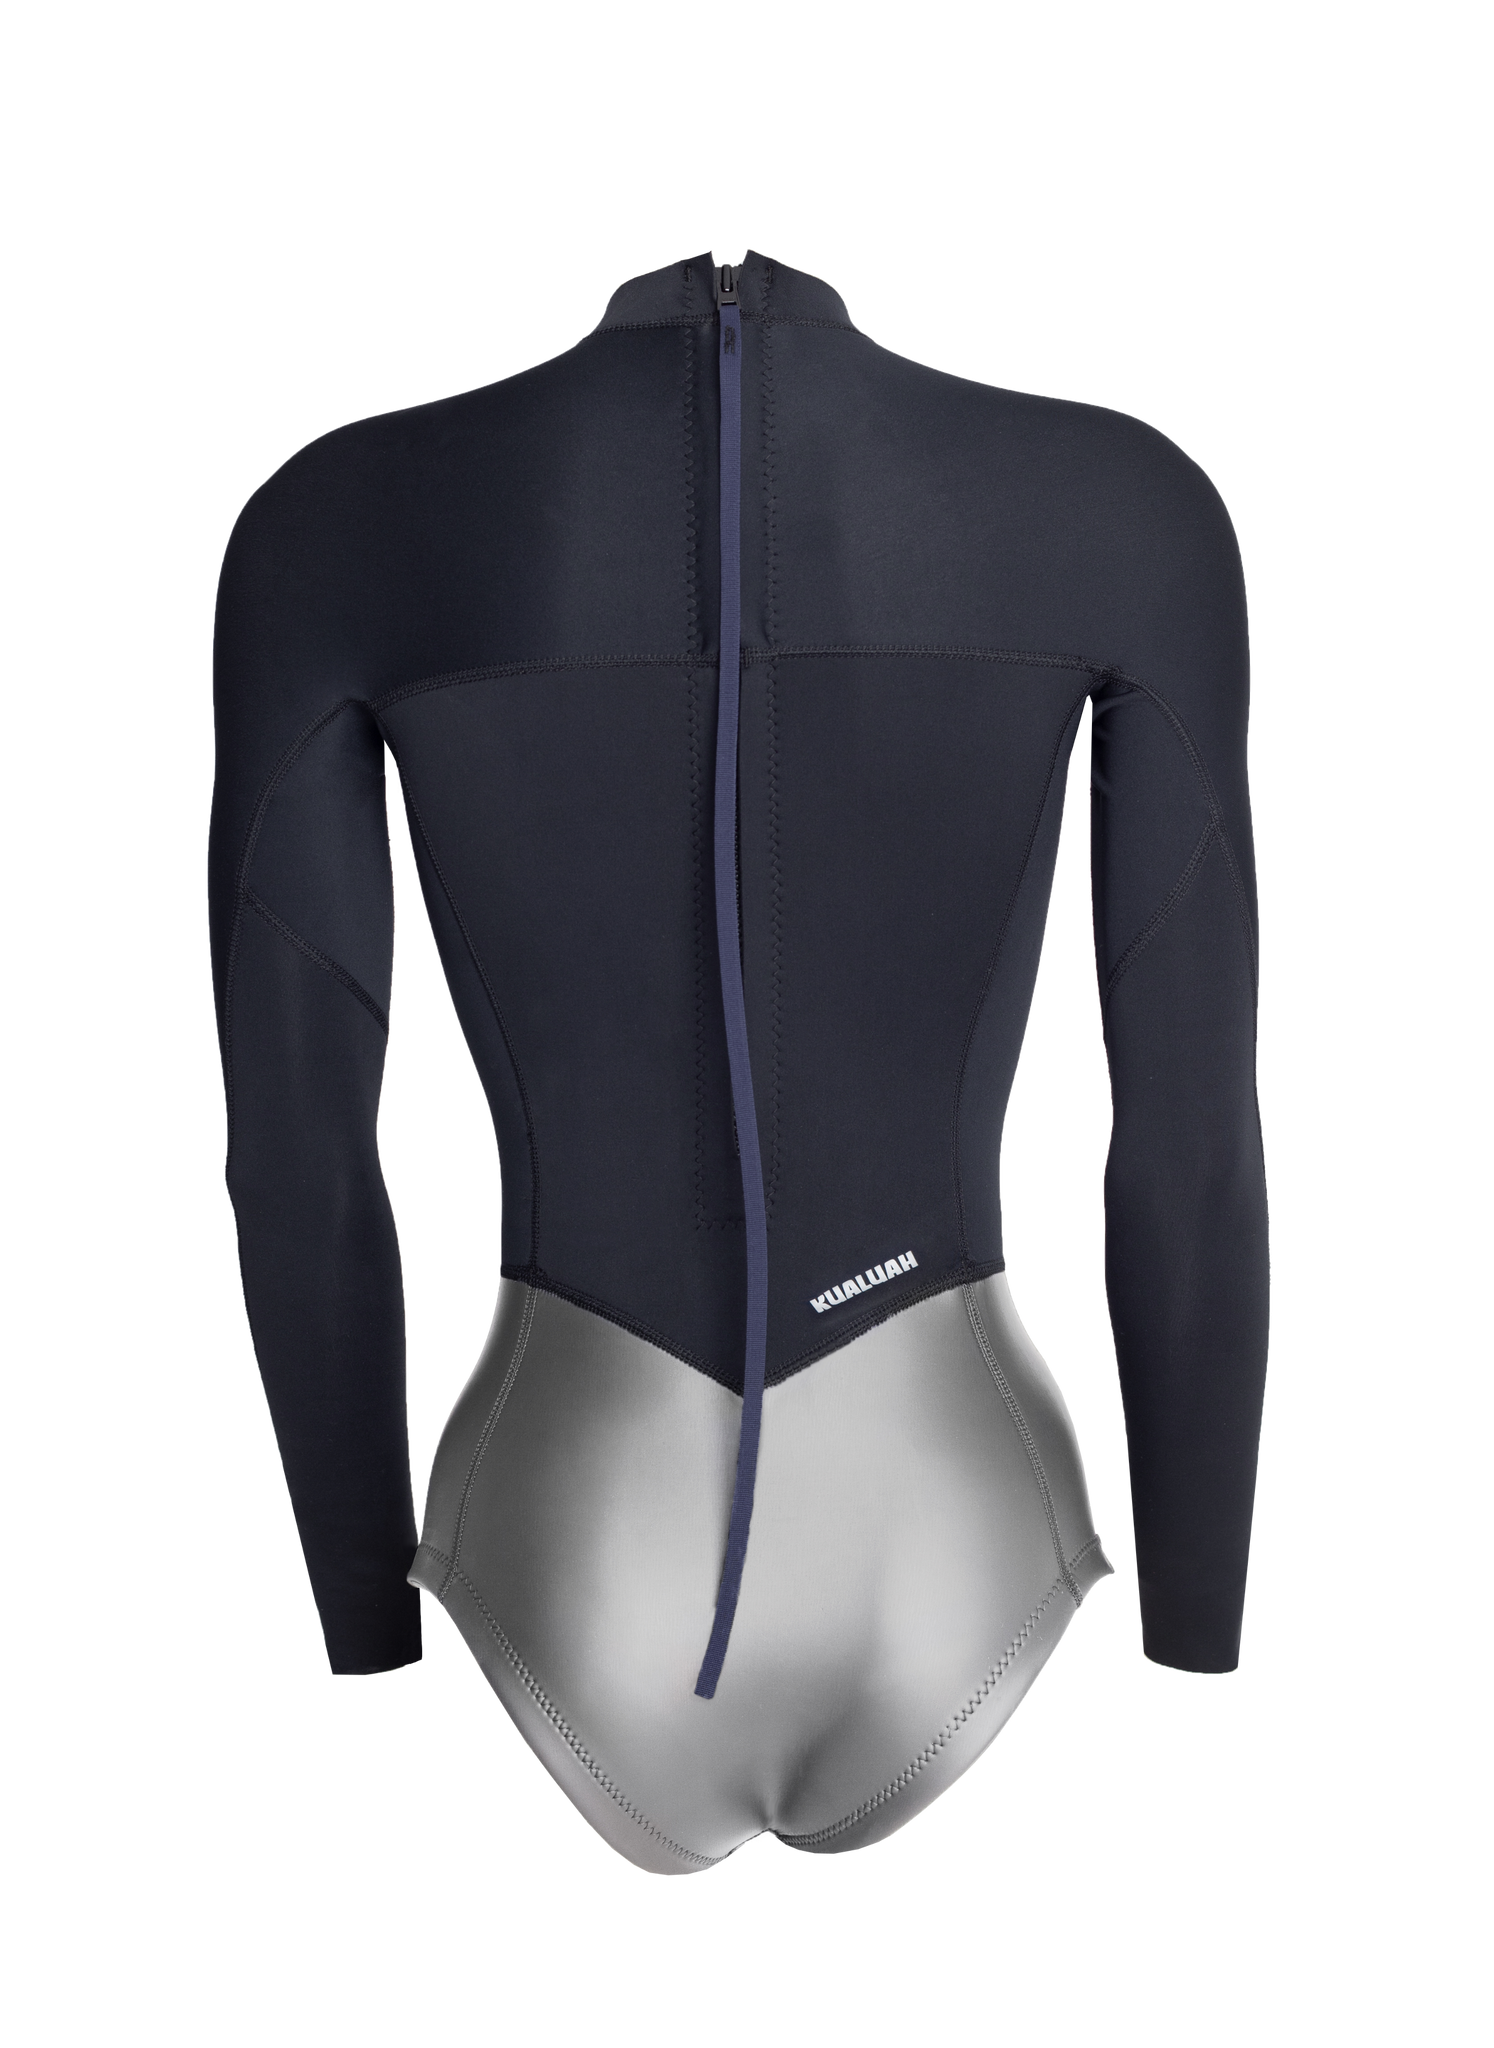 Kualuah neoprene springsuit / shorty. Keeping you warm while surfing, diving, kiteboarding and wakeboarding . Wear it with our leggings and jacket to explore our oceans, coler waters. Made out of limestone neoprene.